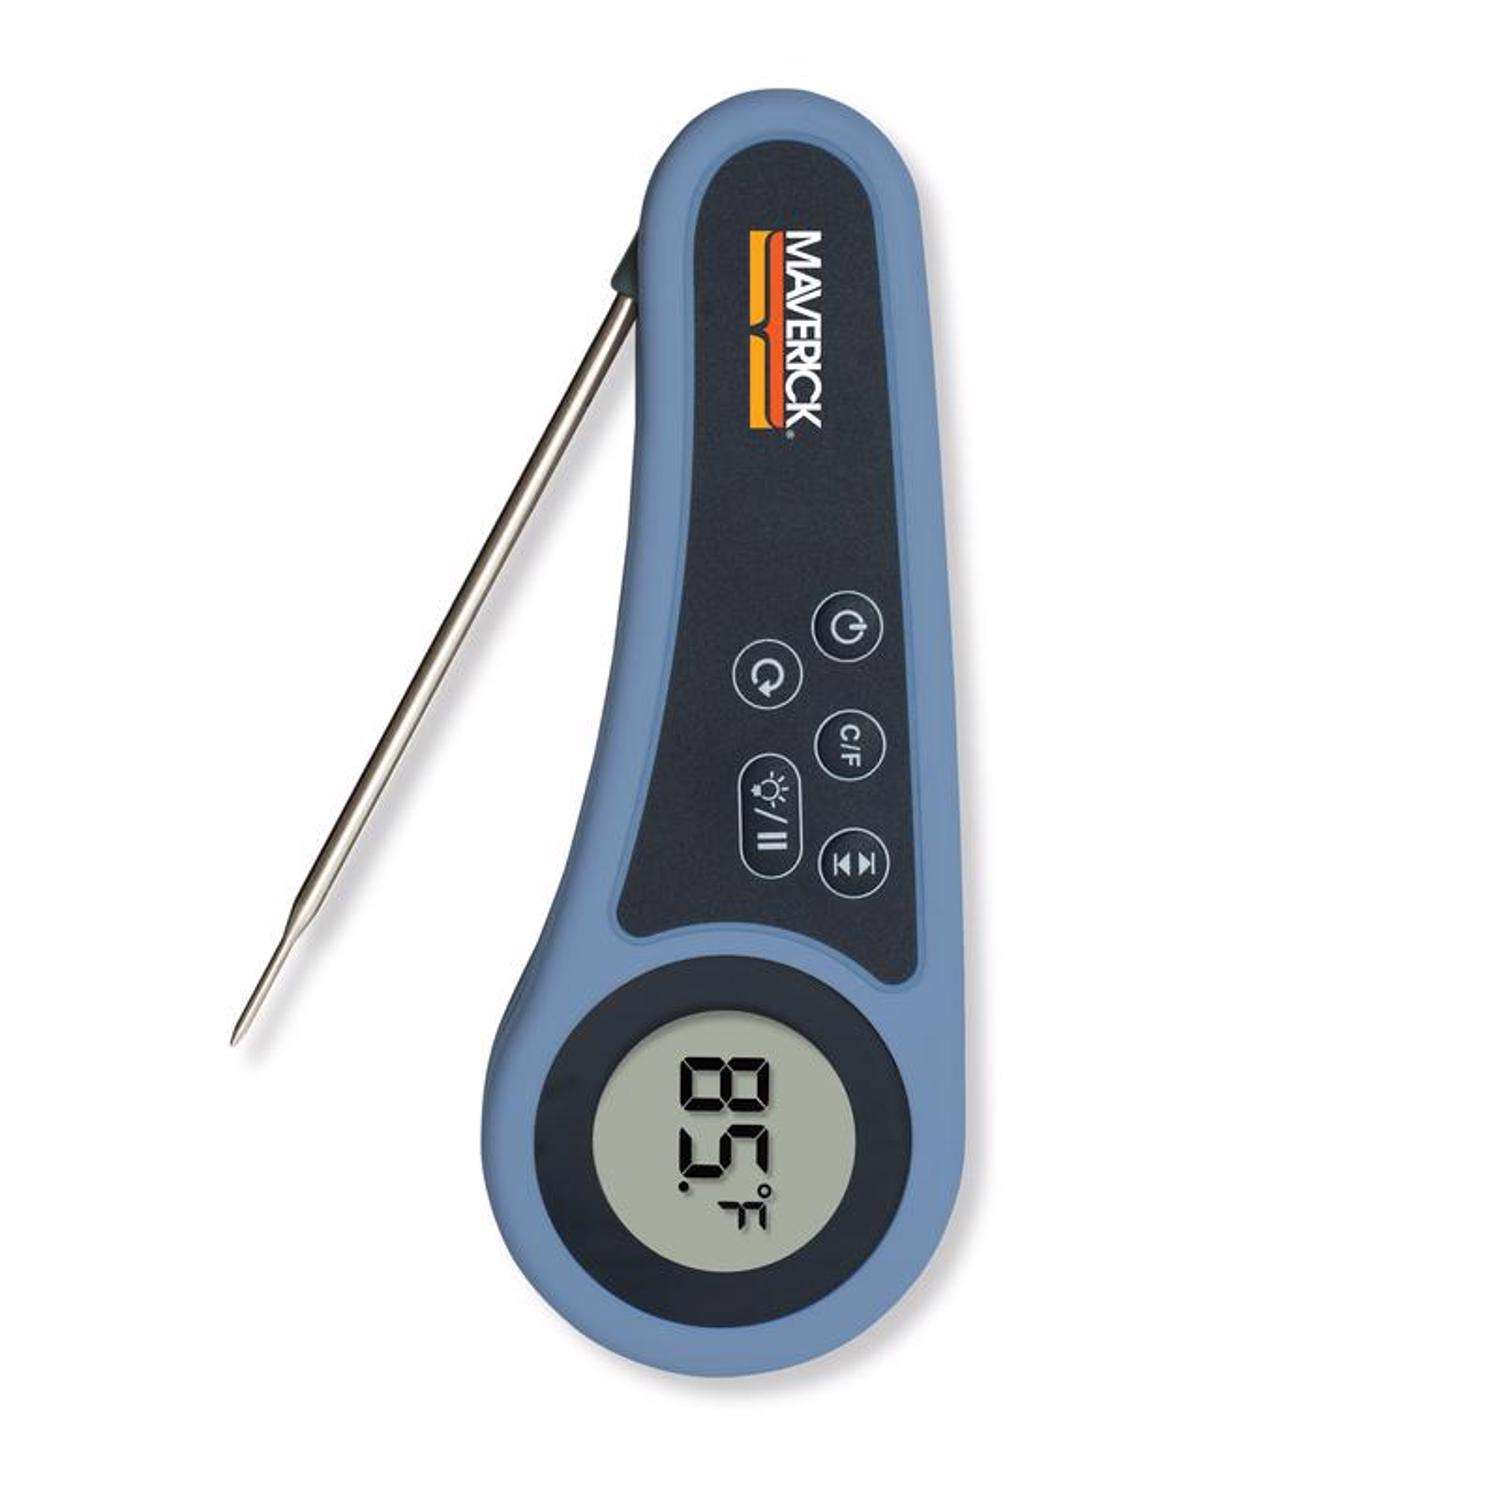 NEW Sealed Expert Grill Wireless Digital BBQ Grilling Thermometer